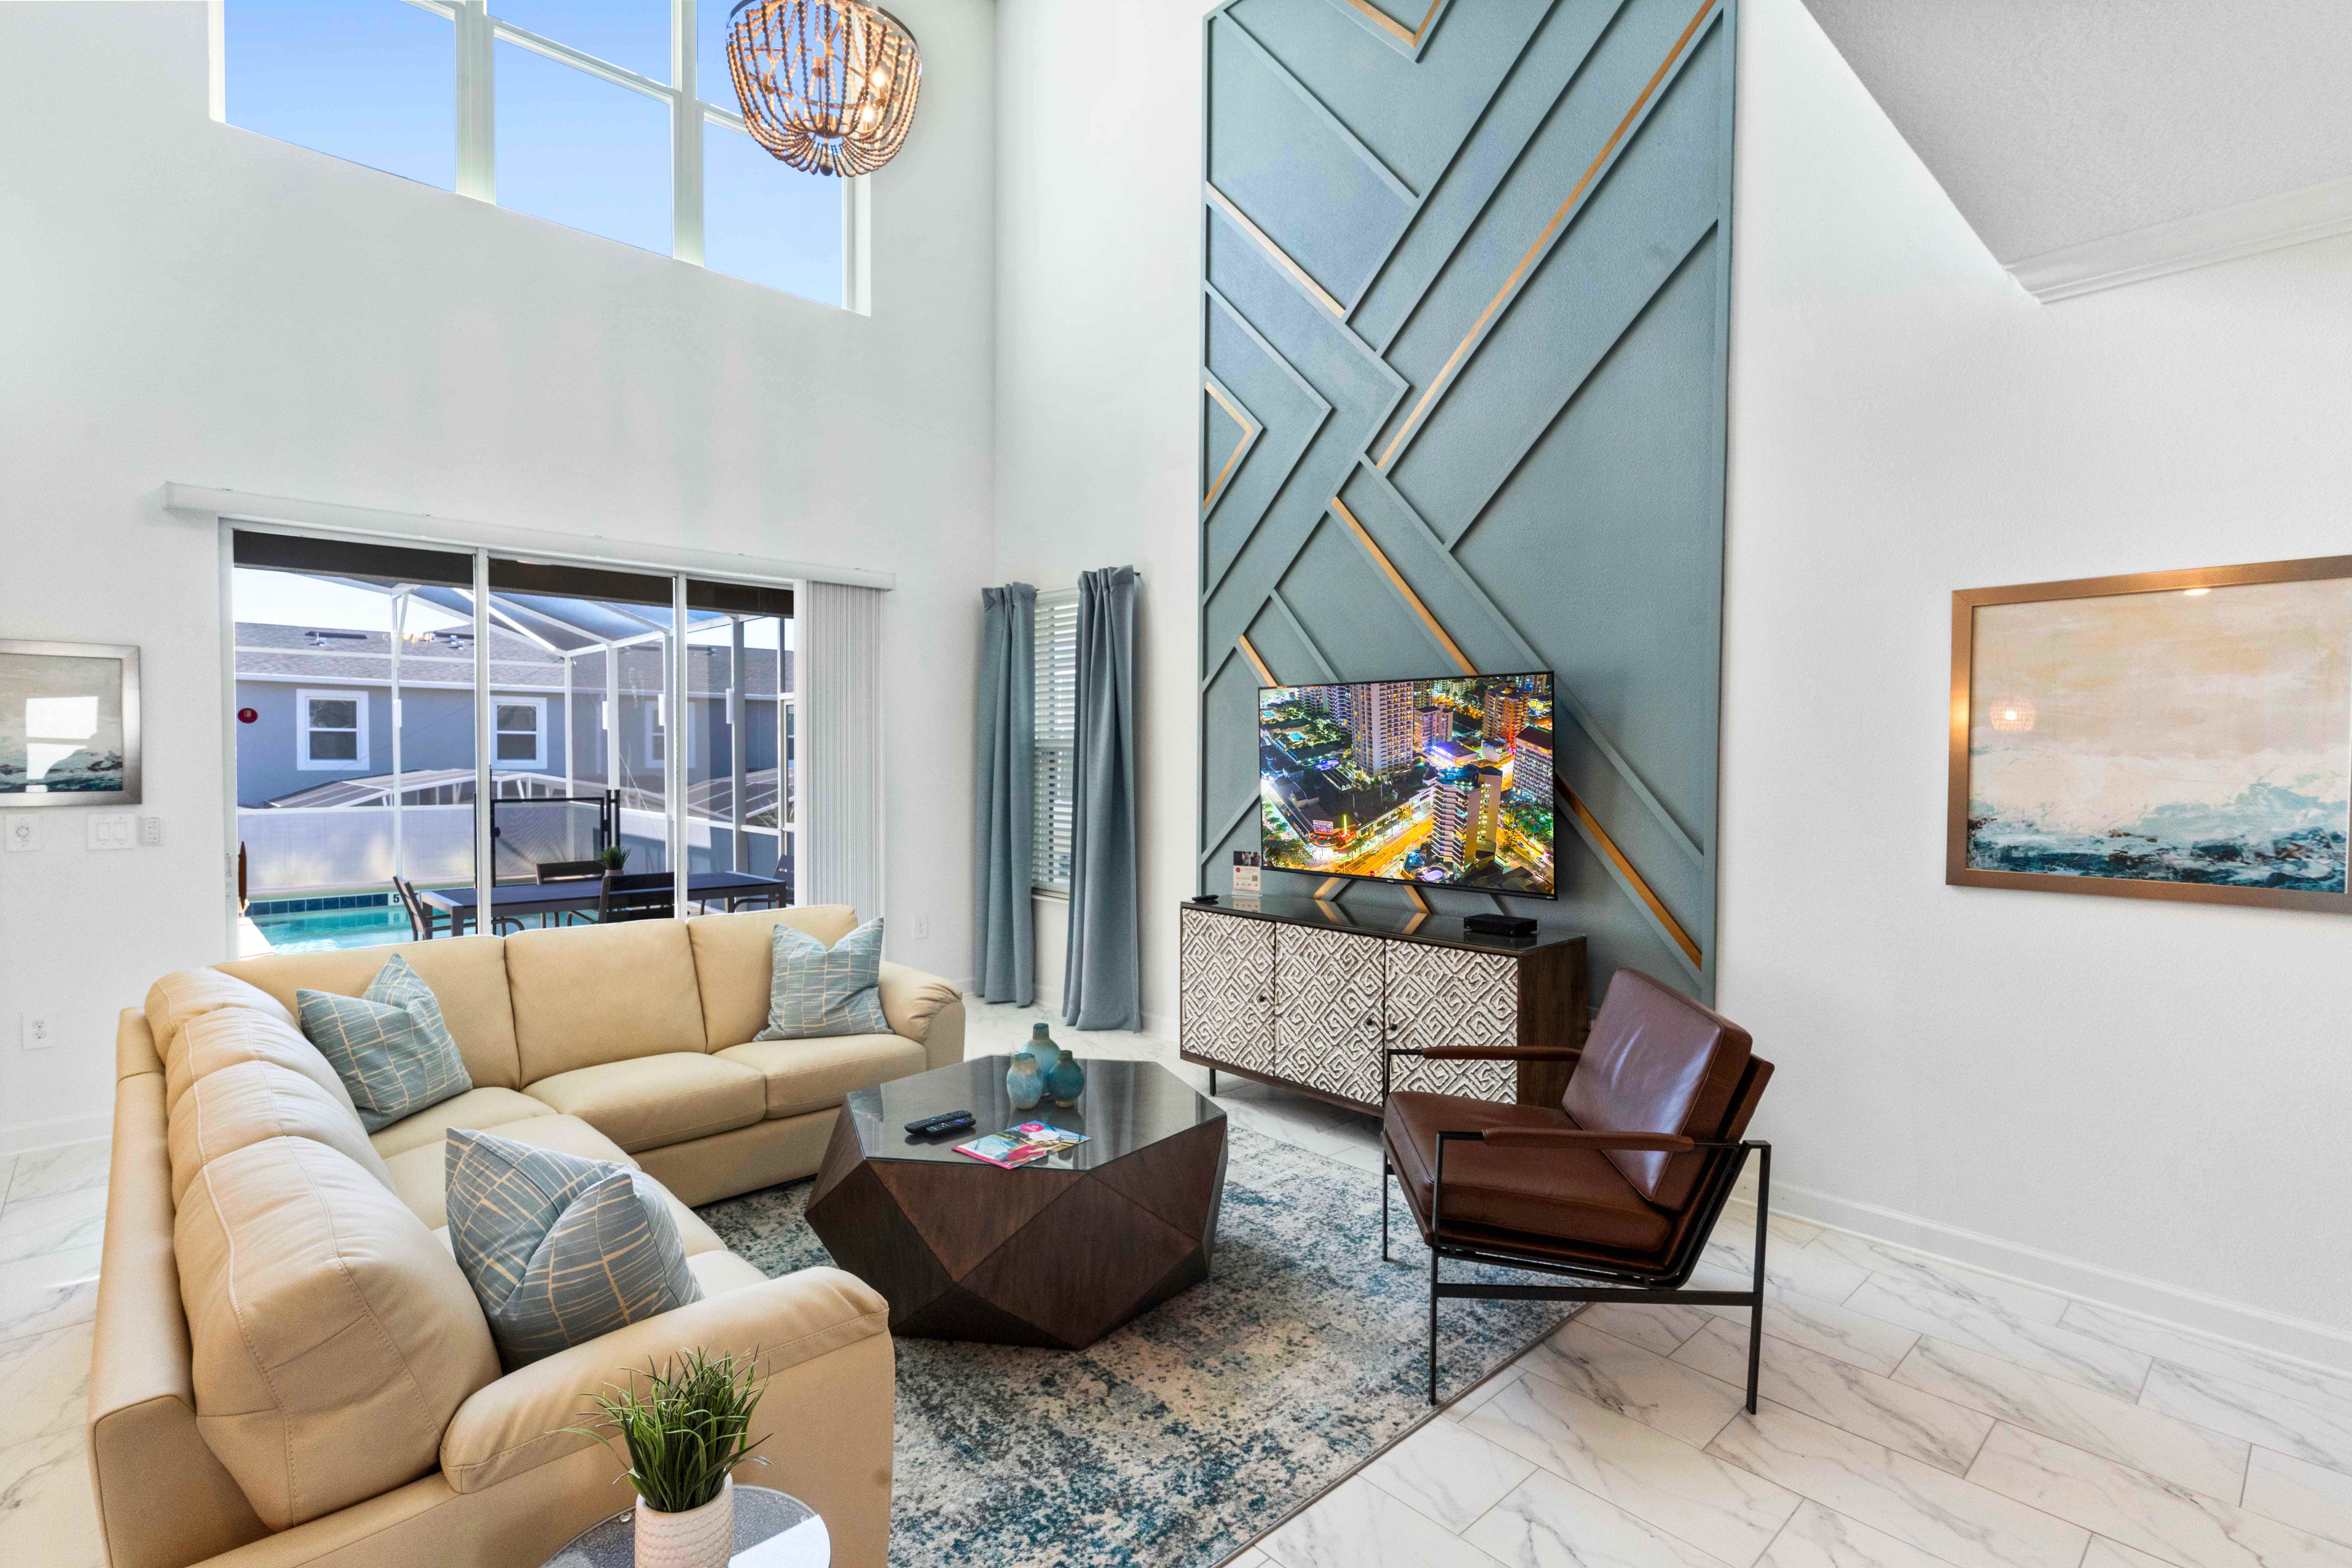 Lavish Living Area of the Townhouse in Davenport Florida - Smart TV and Netflix - Chic and contemporary living area design with clean lines and modern furnishings - Cozy seating area conducive to relaxation and socializing